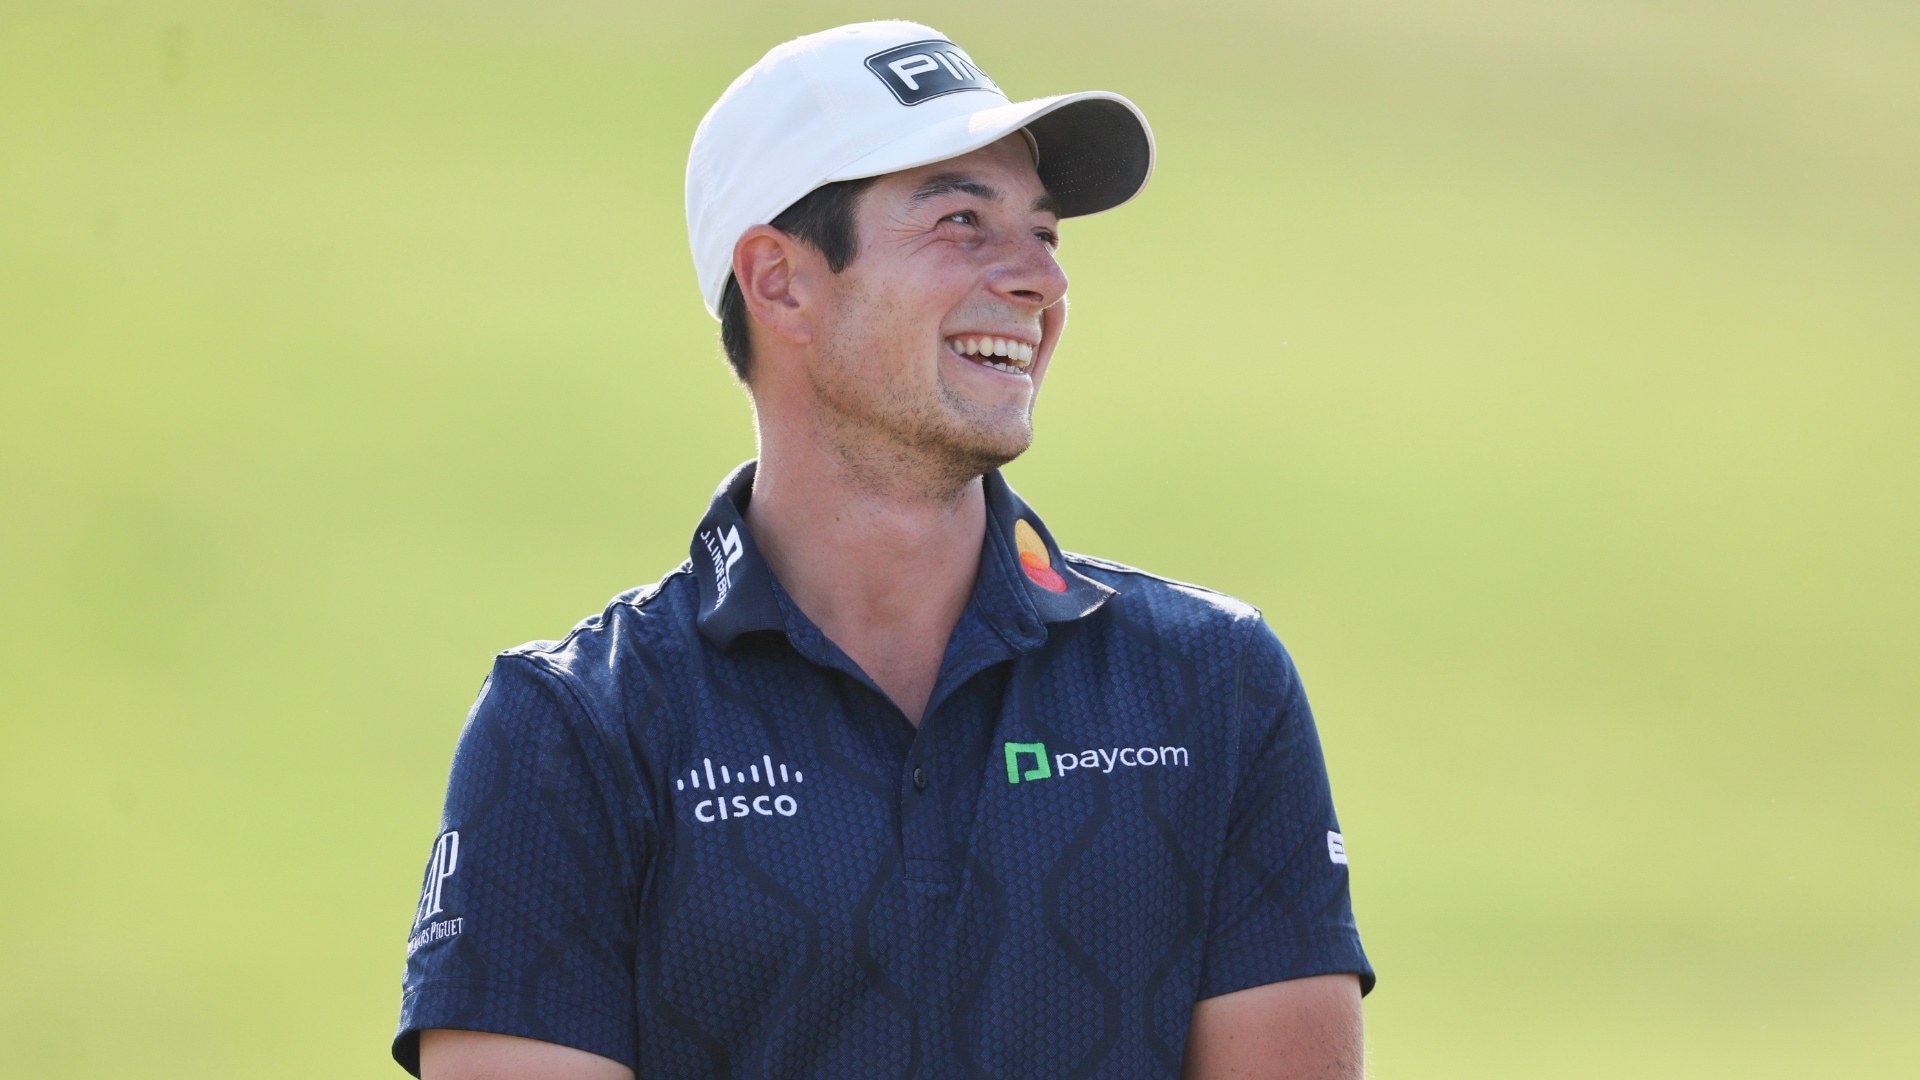 Viktor Hovland caddies for friend less than 24 hours after Memorial win